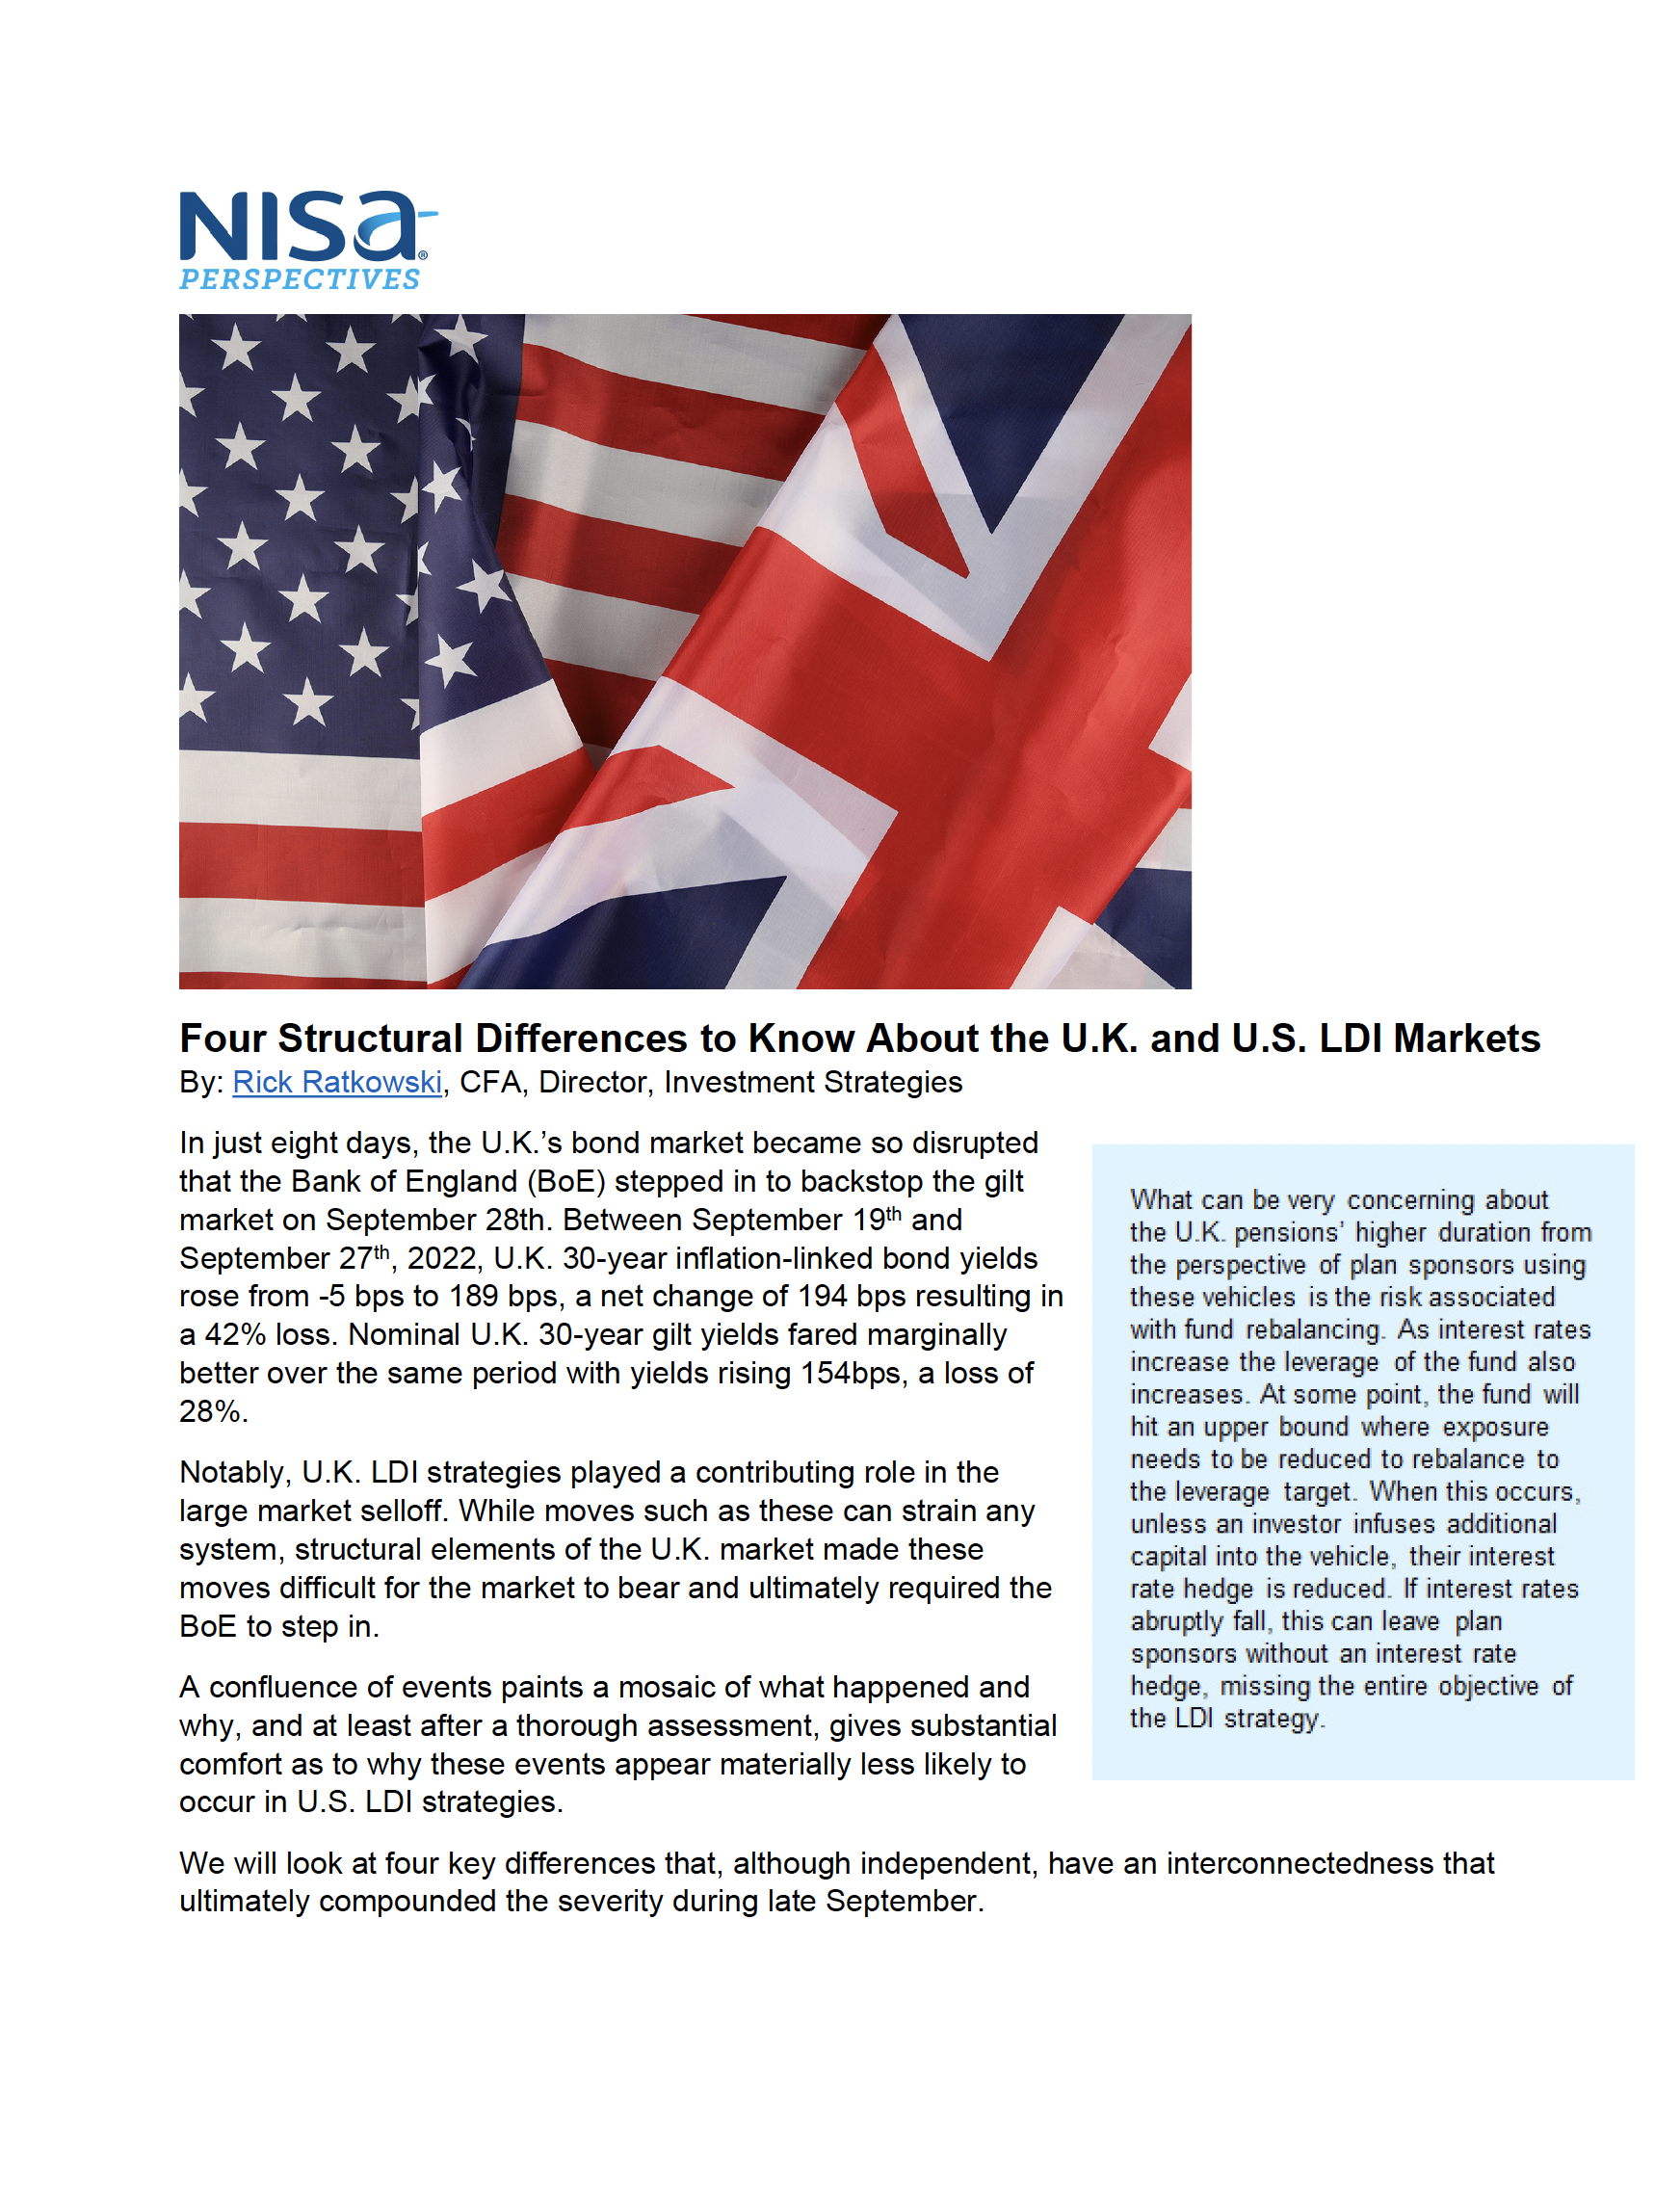 NISA Perspectives Four Structural Differences To Know About The U.K. And U.S. LDI Markets